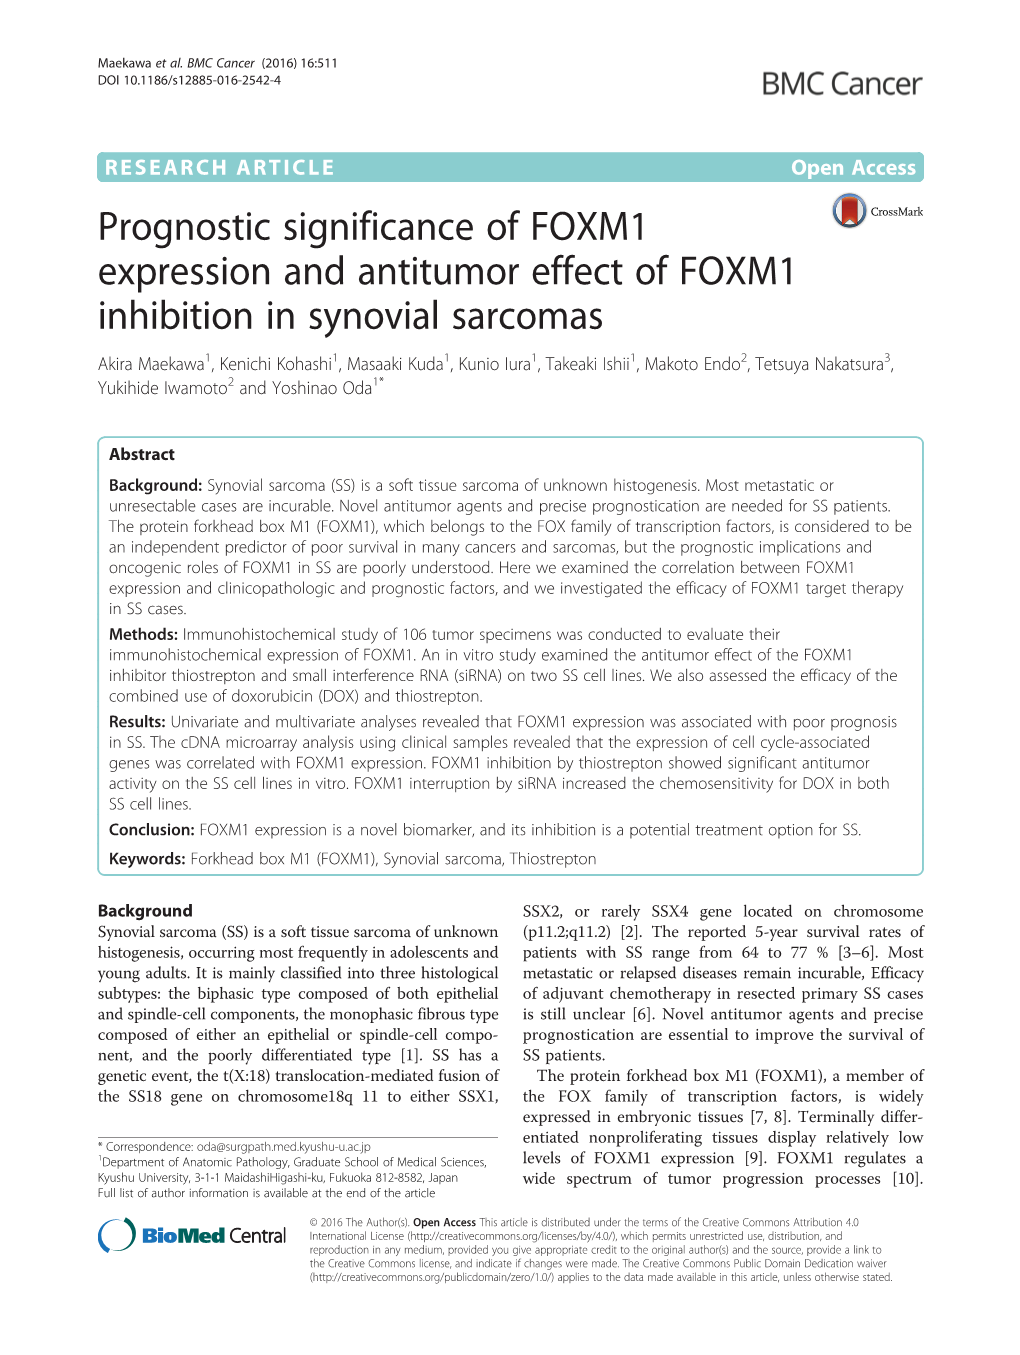 Prognostic Significance of FOXM1 Expression and Antitumor Effect Of